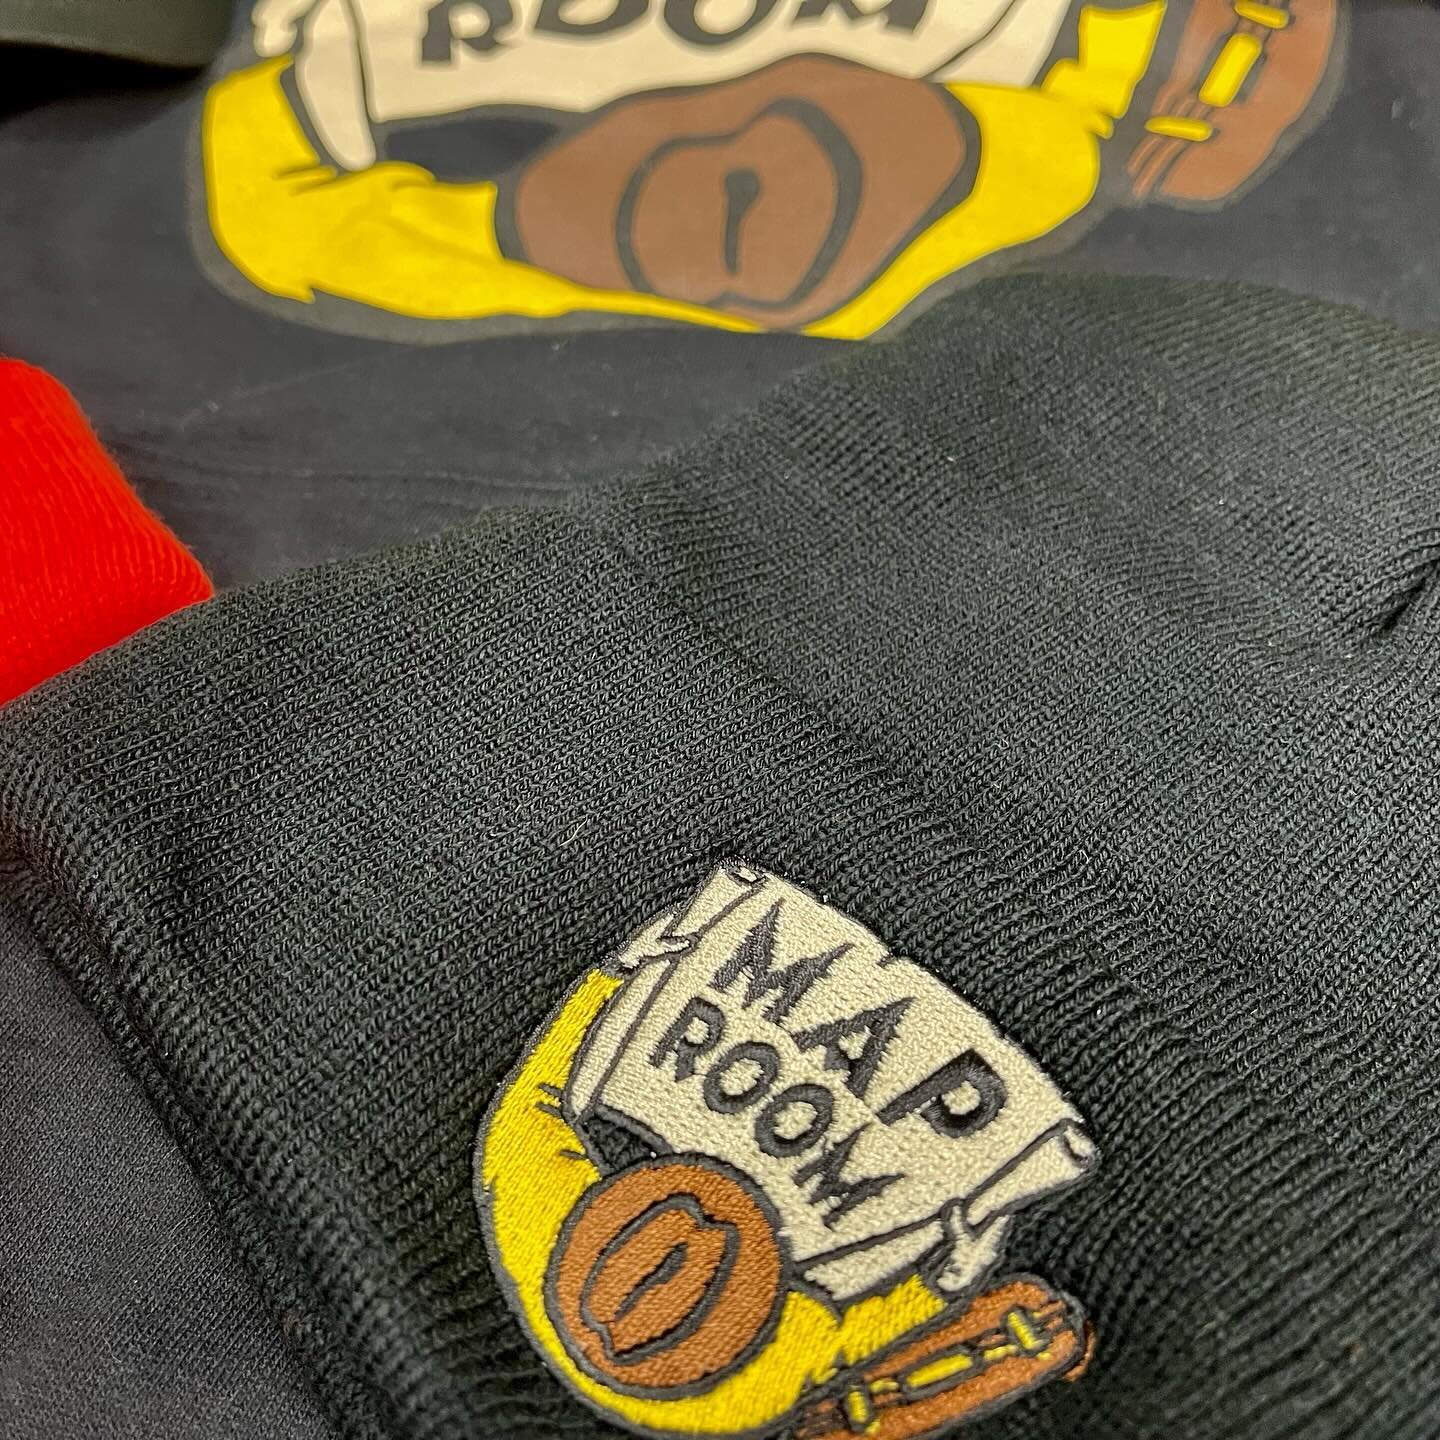 When you need your screen printing and embroidery to match perfectly, come to @explodinghouse 👌🏼

Pantone and thread matching is incredibly important if you want to make your logos match across all garments and styles of production, and most import